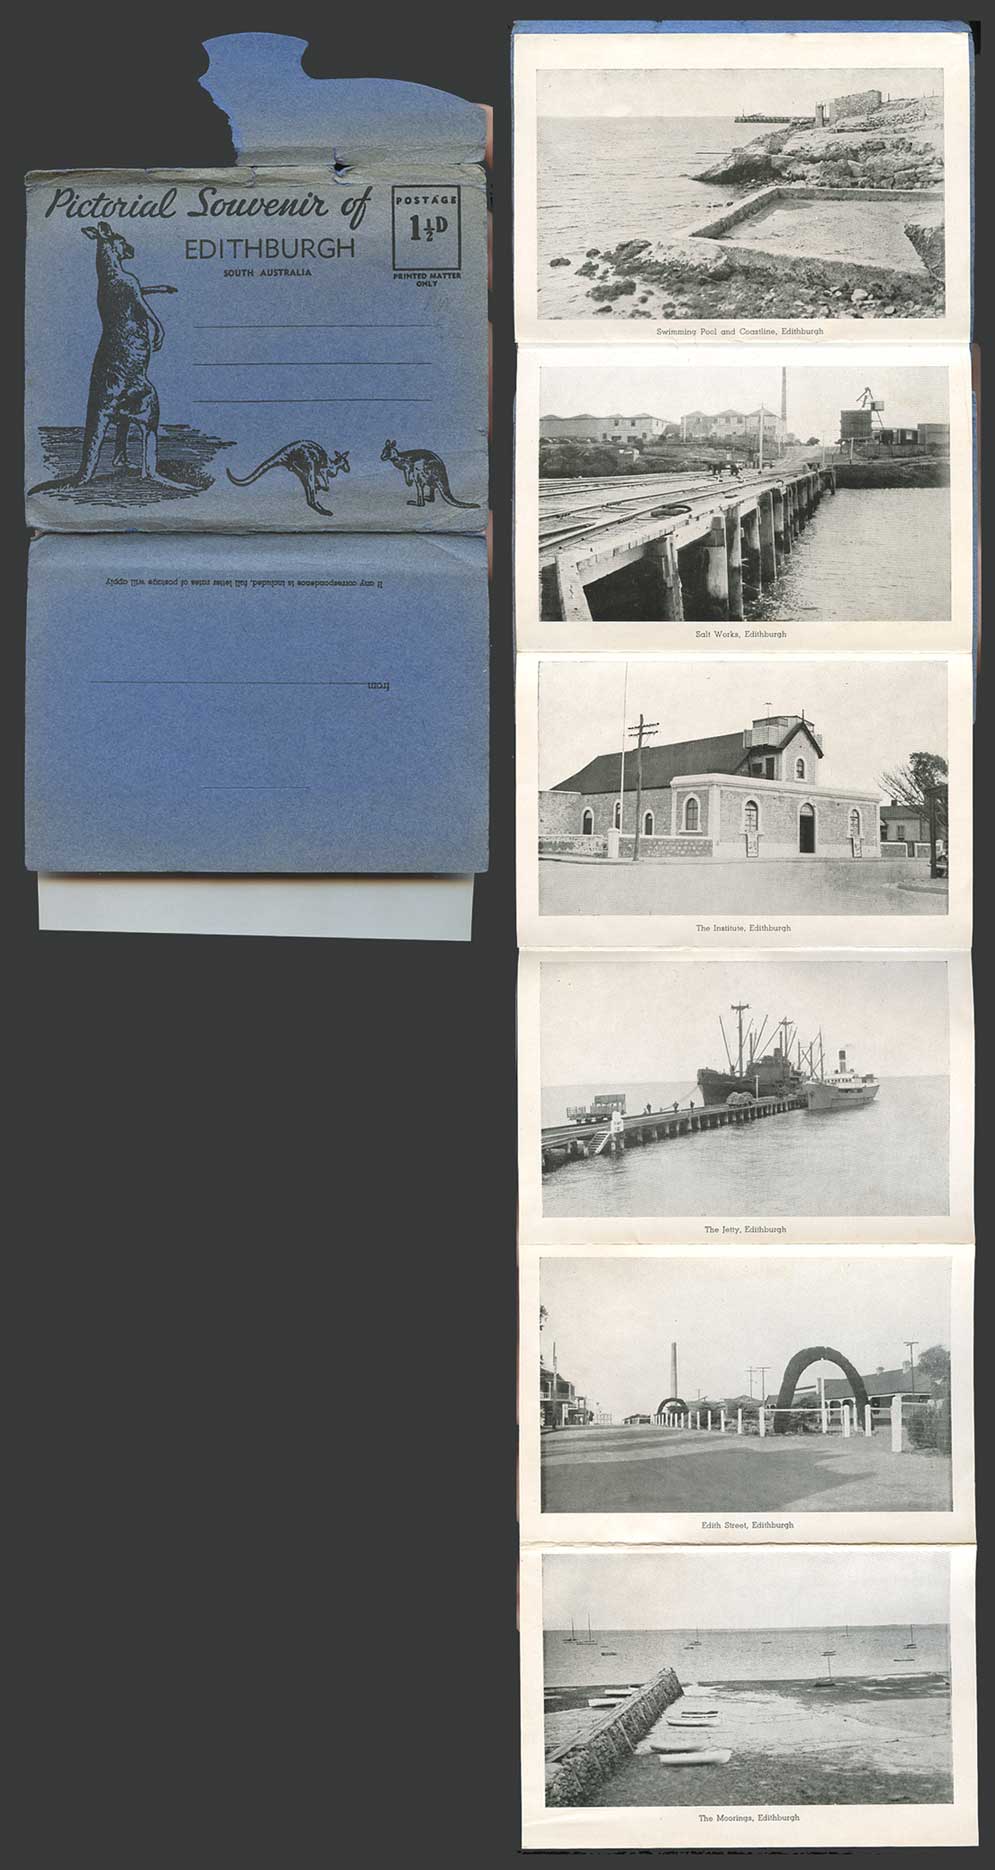 Australia Edithburgh Old Pull-Out Card Edith Street, Salt Works, Institute Jetty